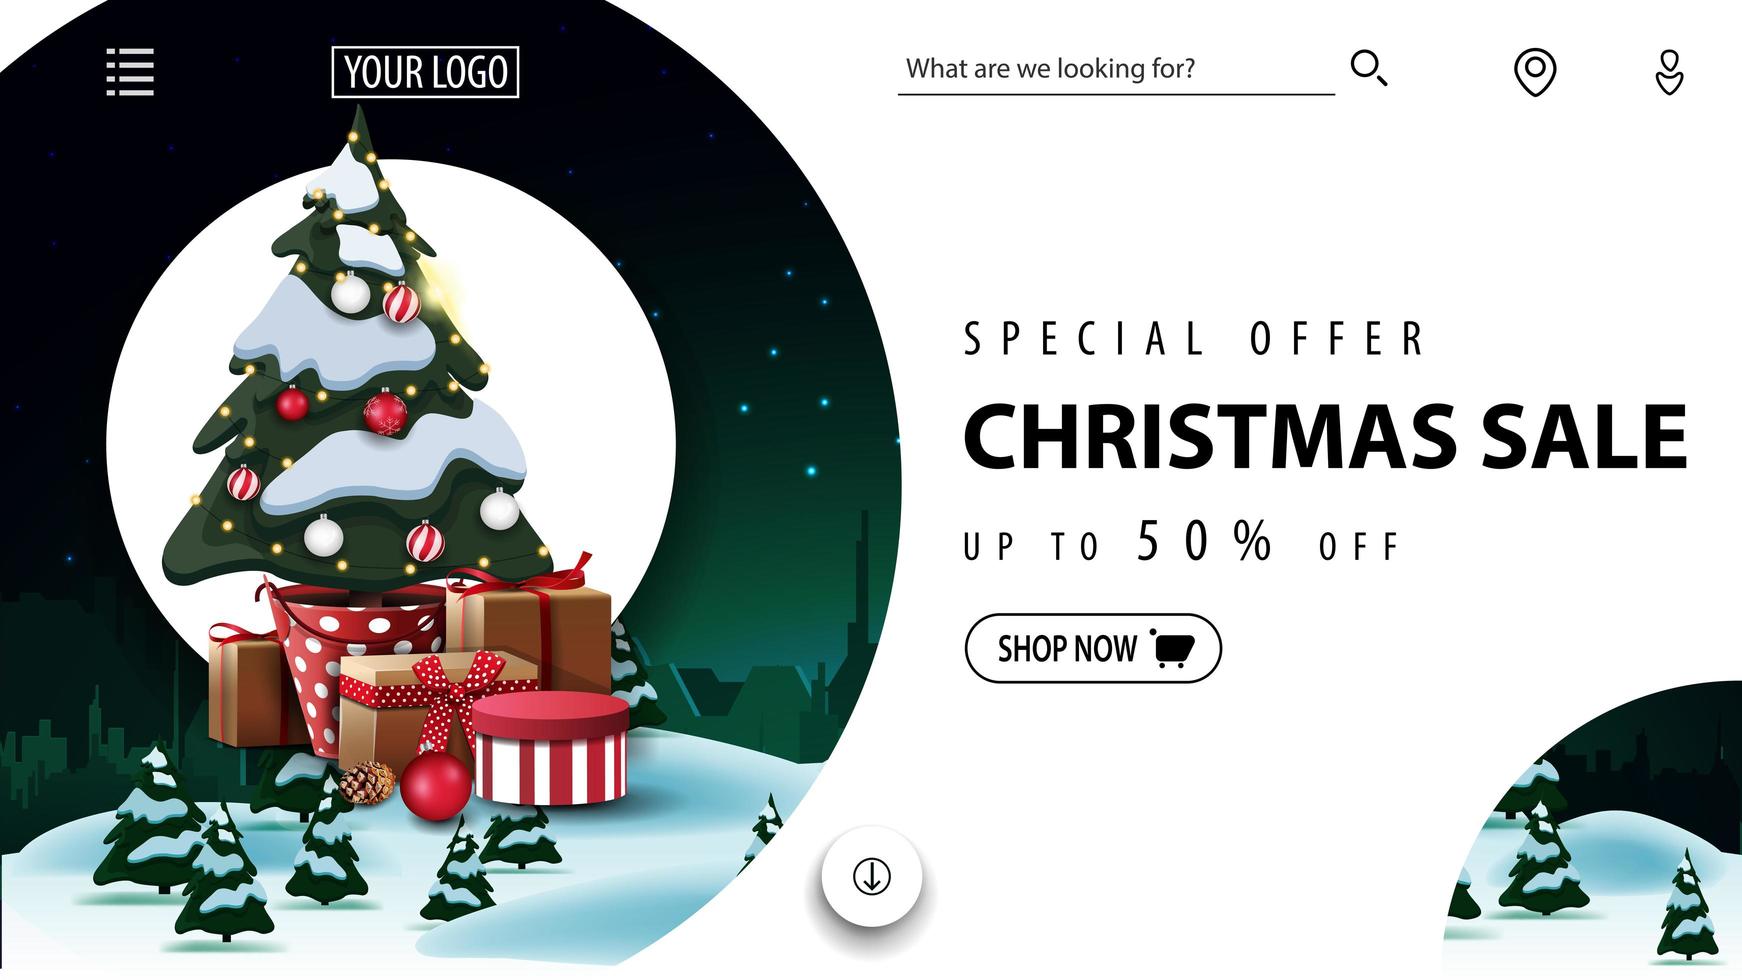 Special offer, Christmas sale, up to 50 off, beautiful discount banner foe website with winter landscape and Christmas tree in a pot with gifts vector